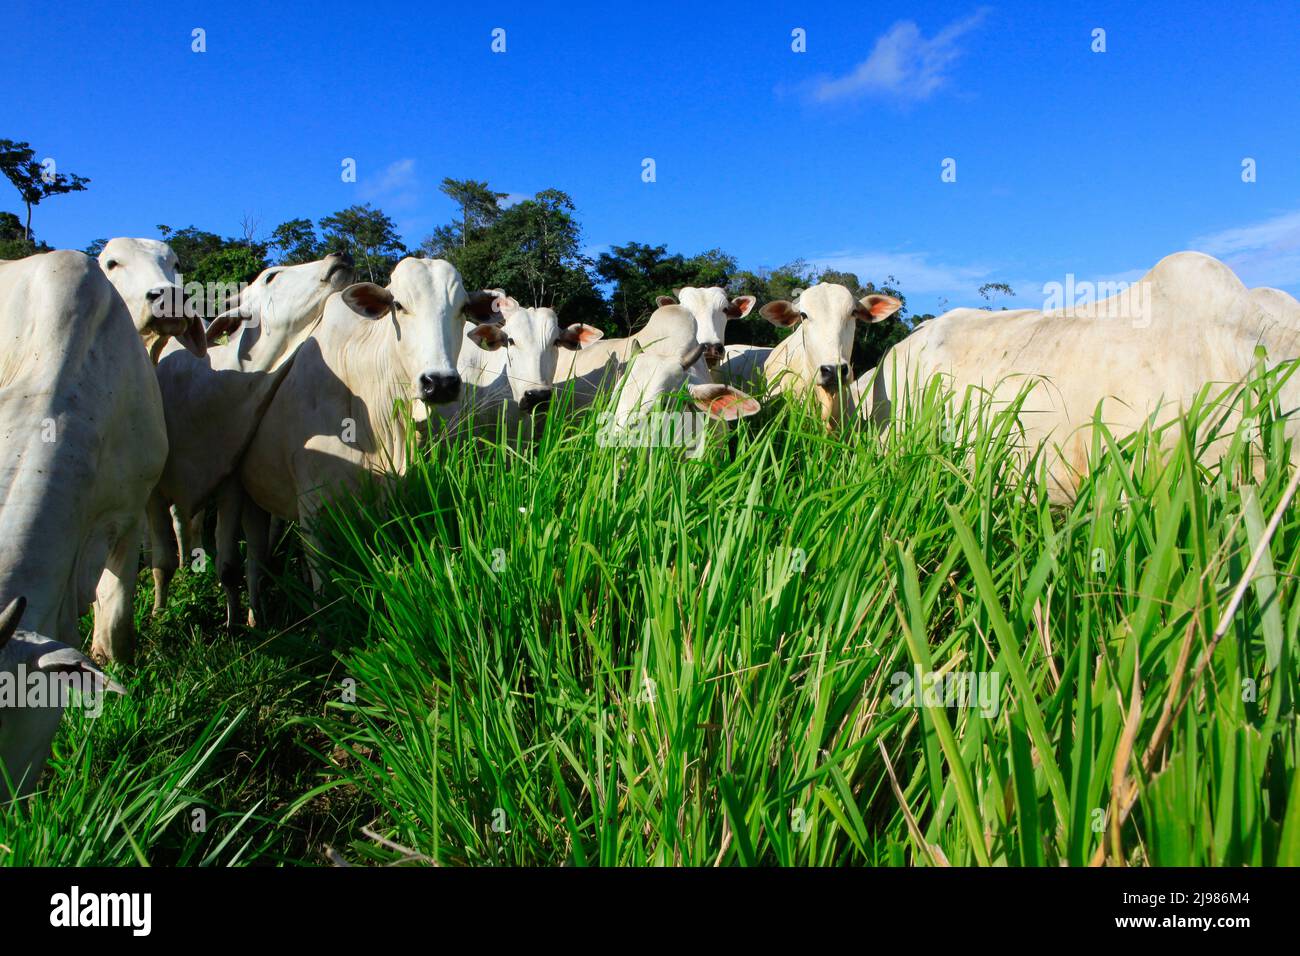 Herd of cattle on green pasture with blue sky on the background. Brazil, Pará State, Amazon. Stock Photo